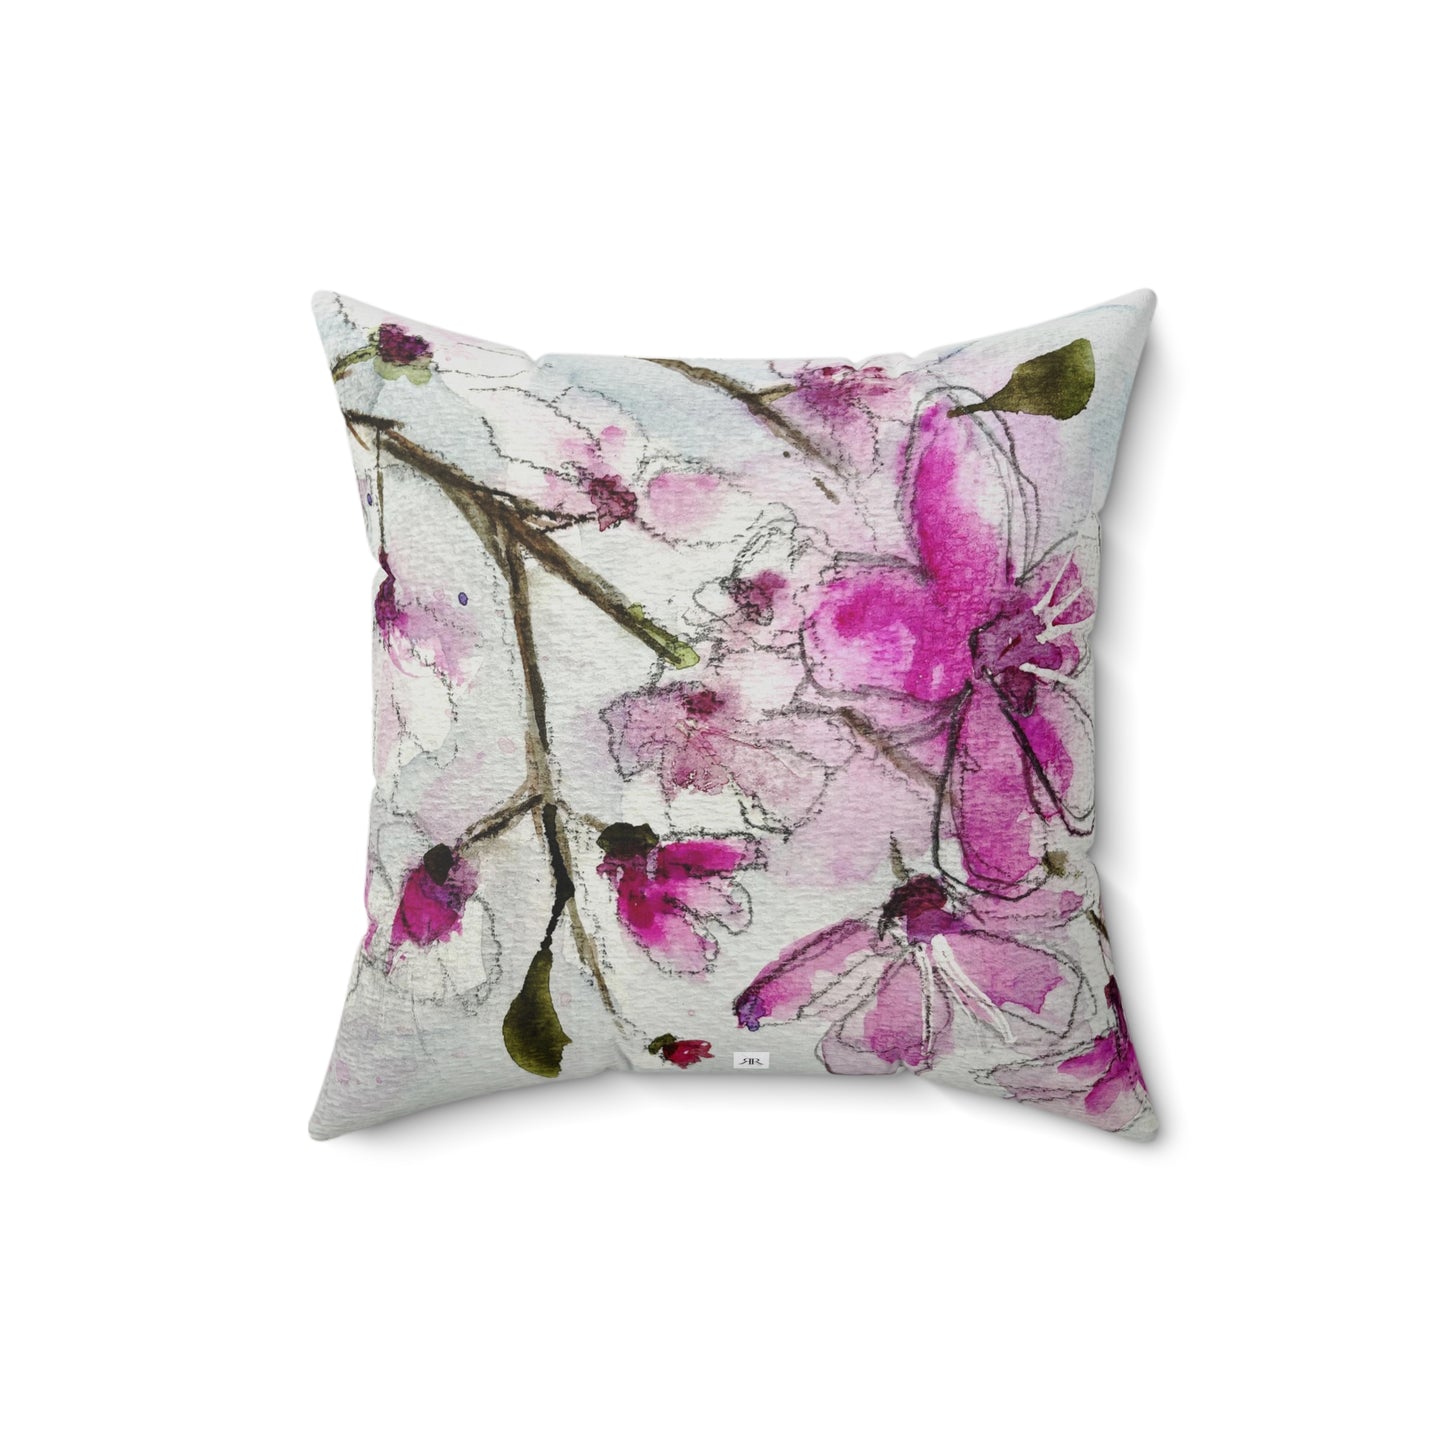 Cherry Blossoms #3 Indoor Spun Polyester Square Pillow